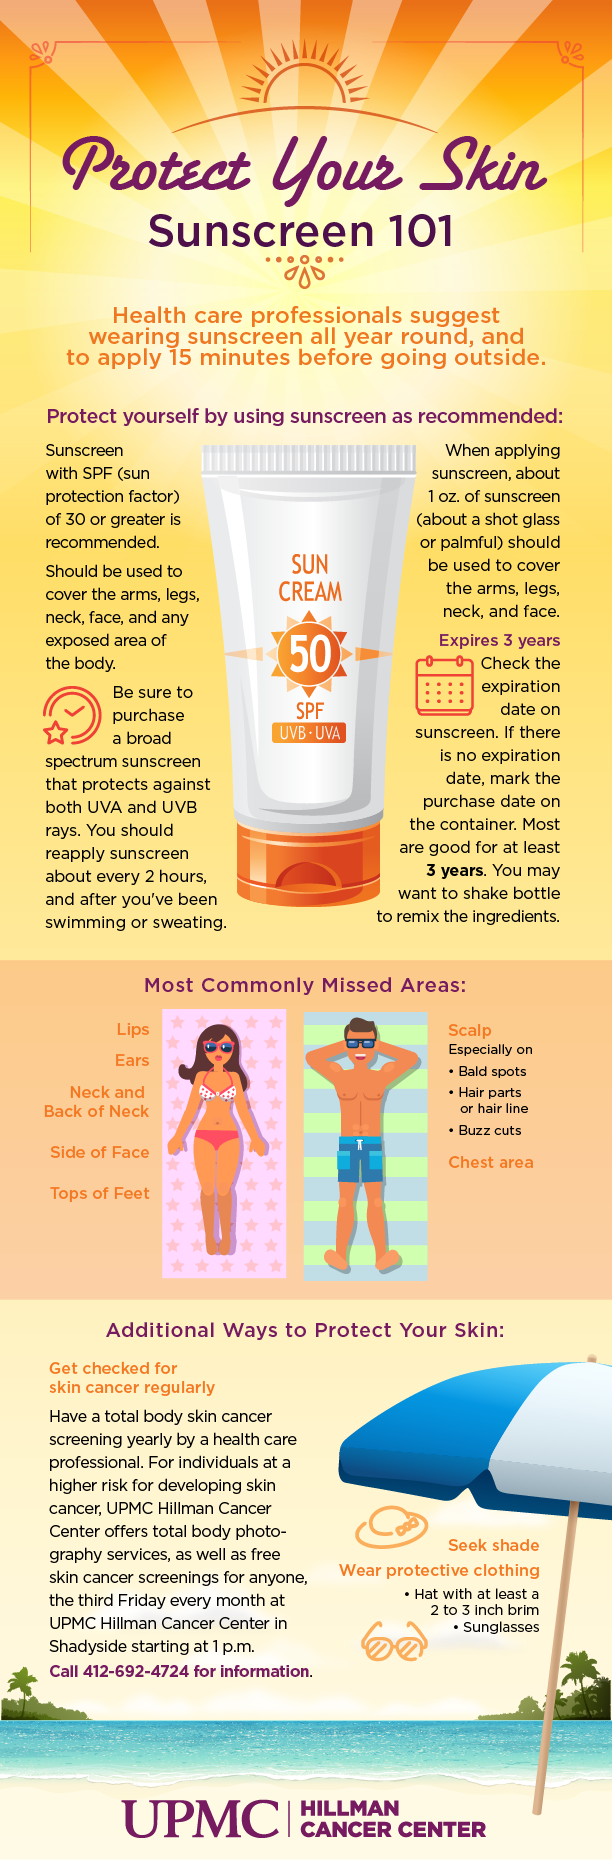 Learn essential facts about sunscreen